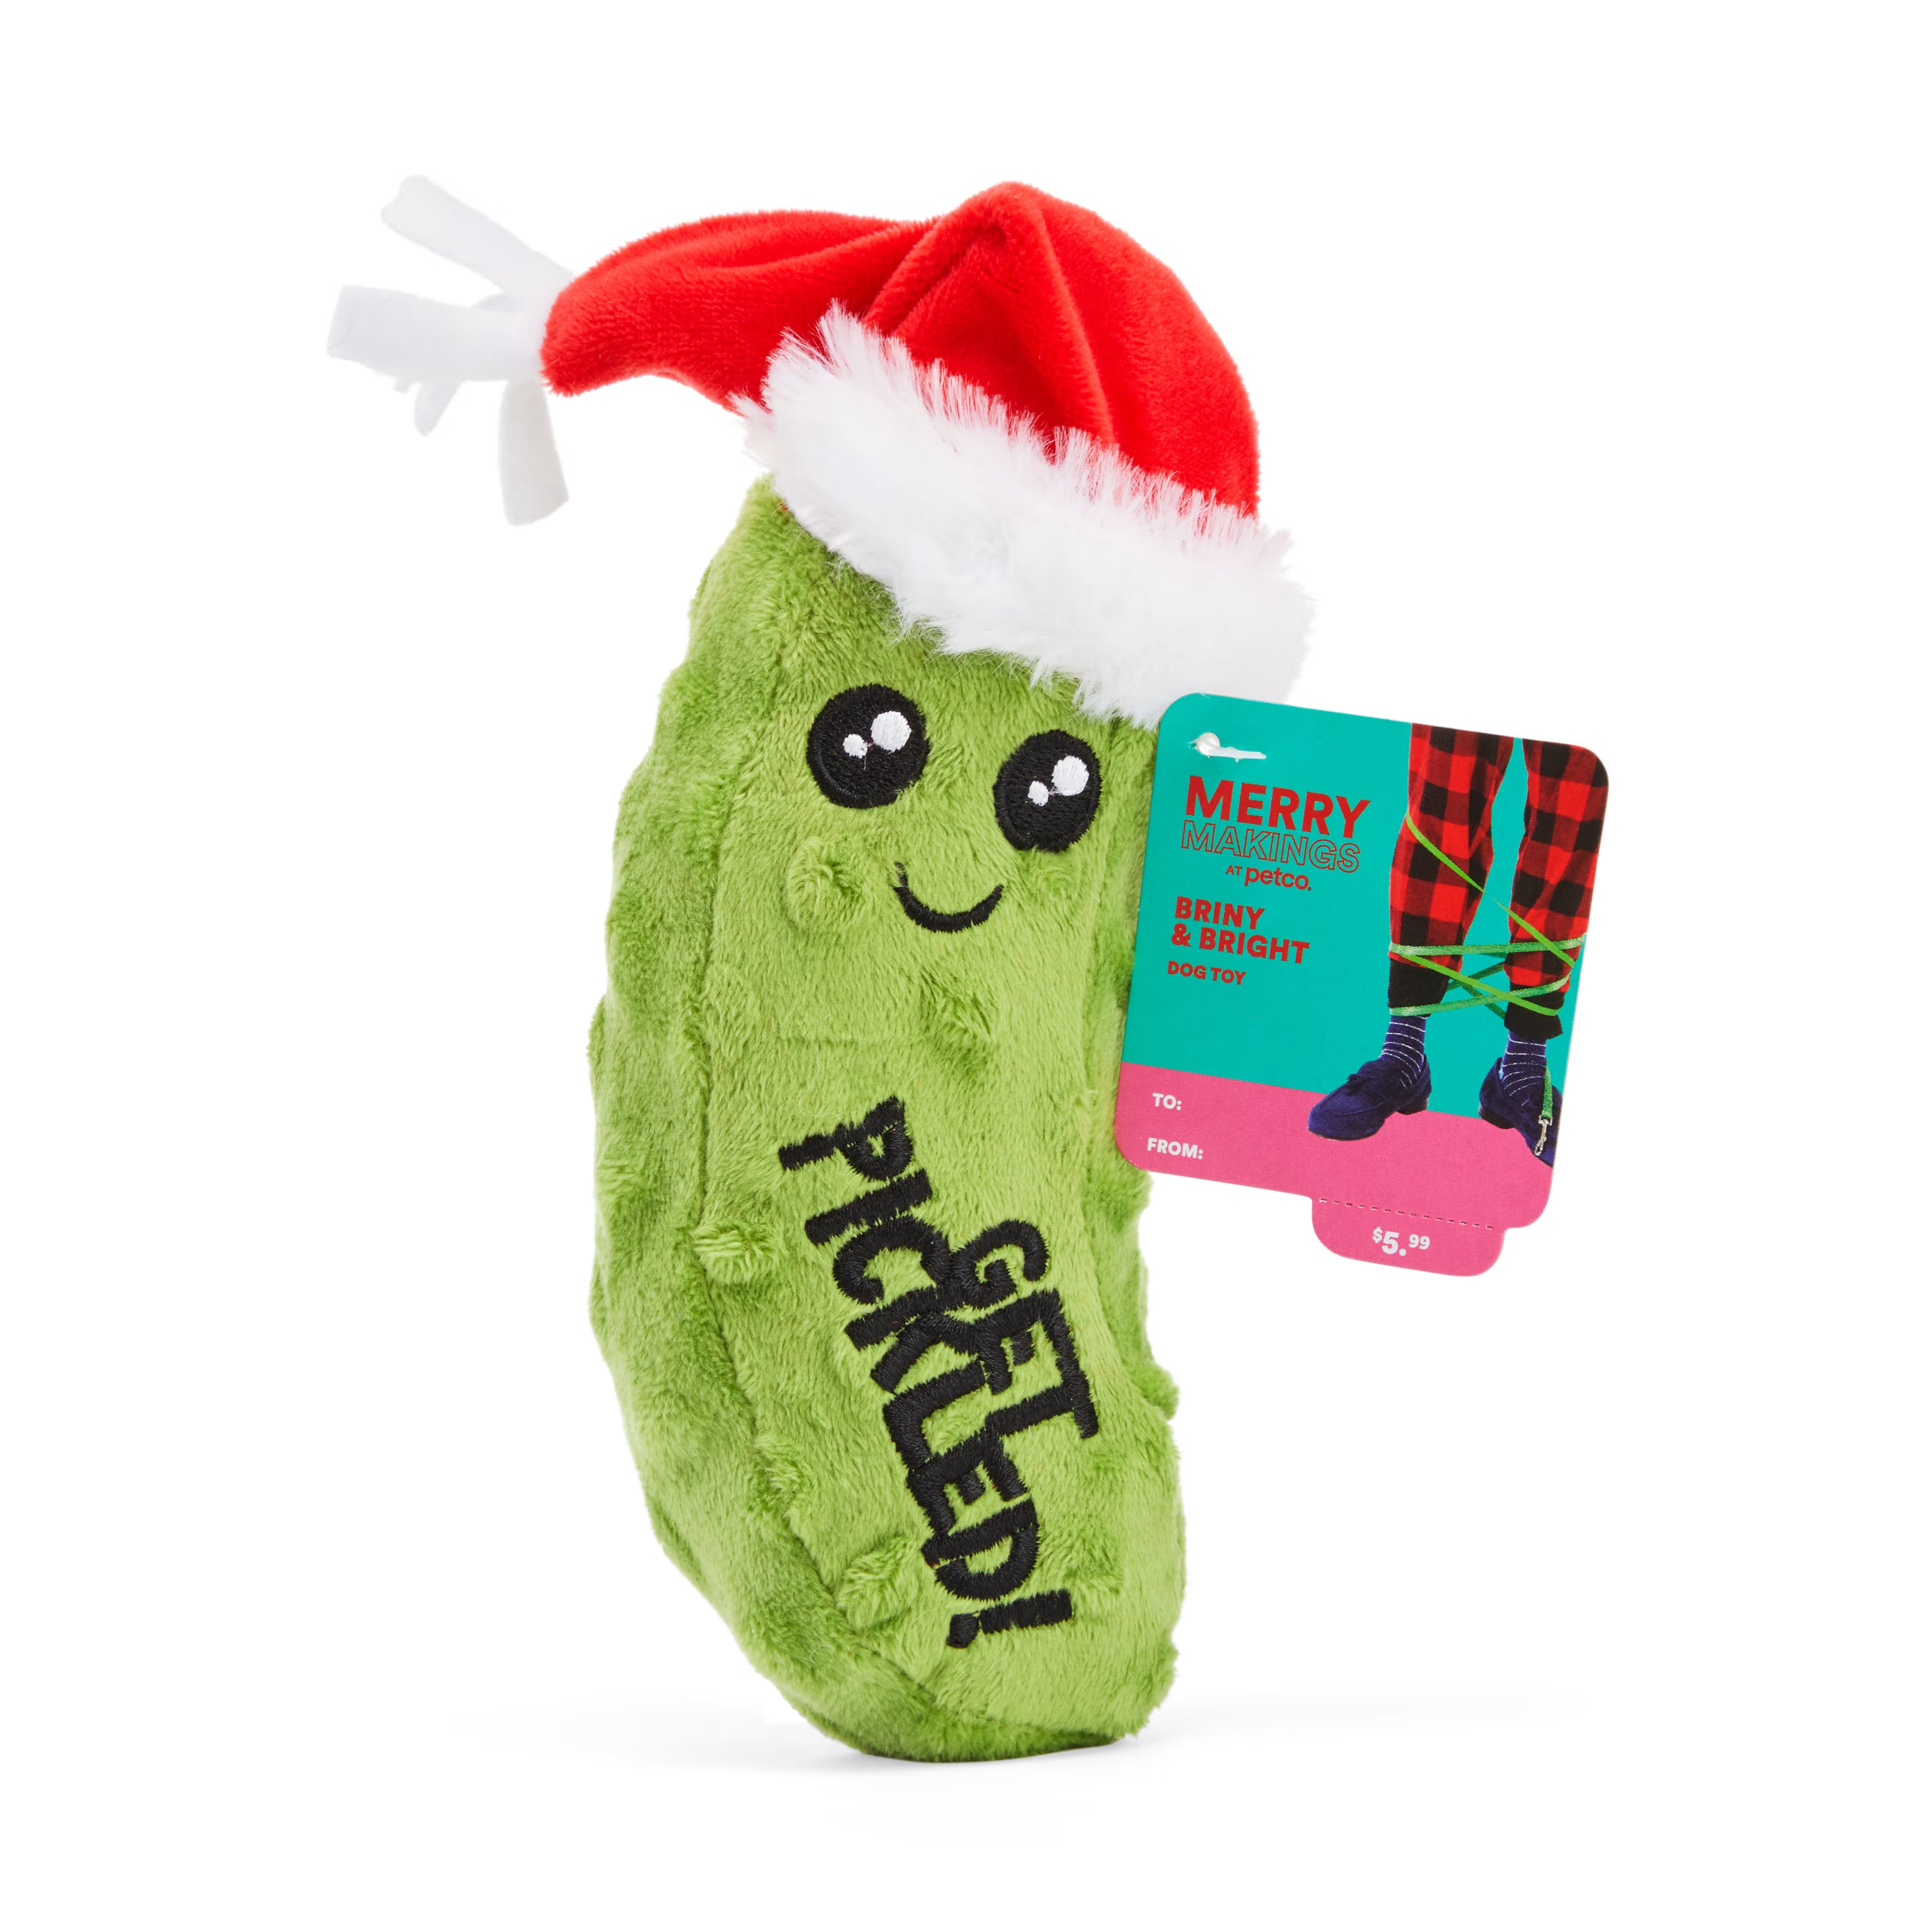 Merry Makings Briny & Bright "Dillightful" Holiday Pickle Plush Dog Toy, Small | Petco